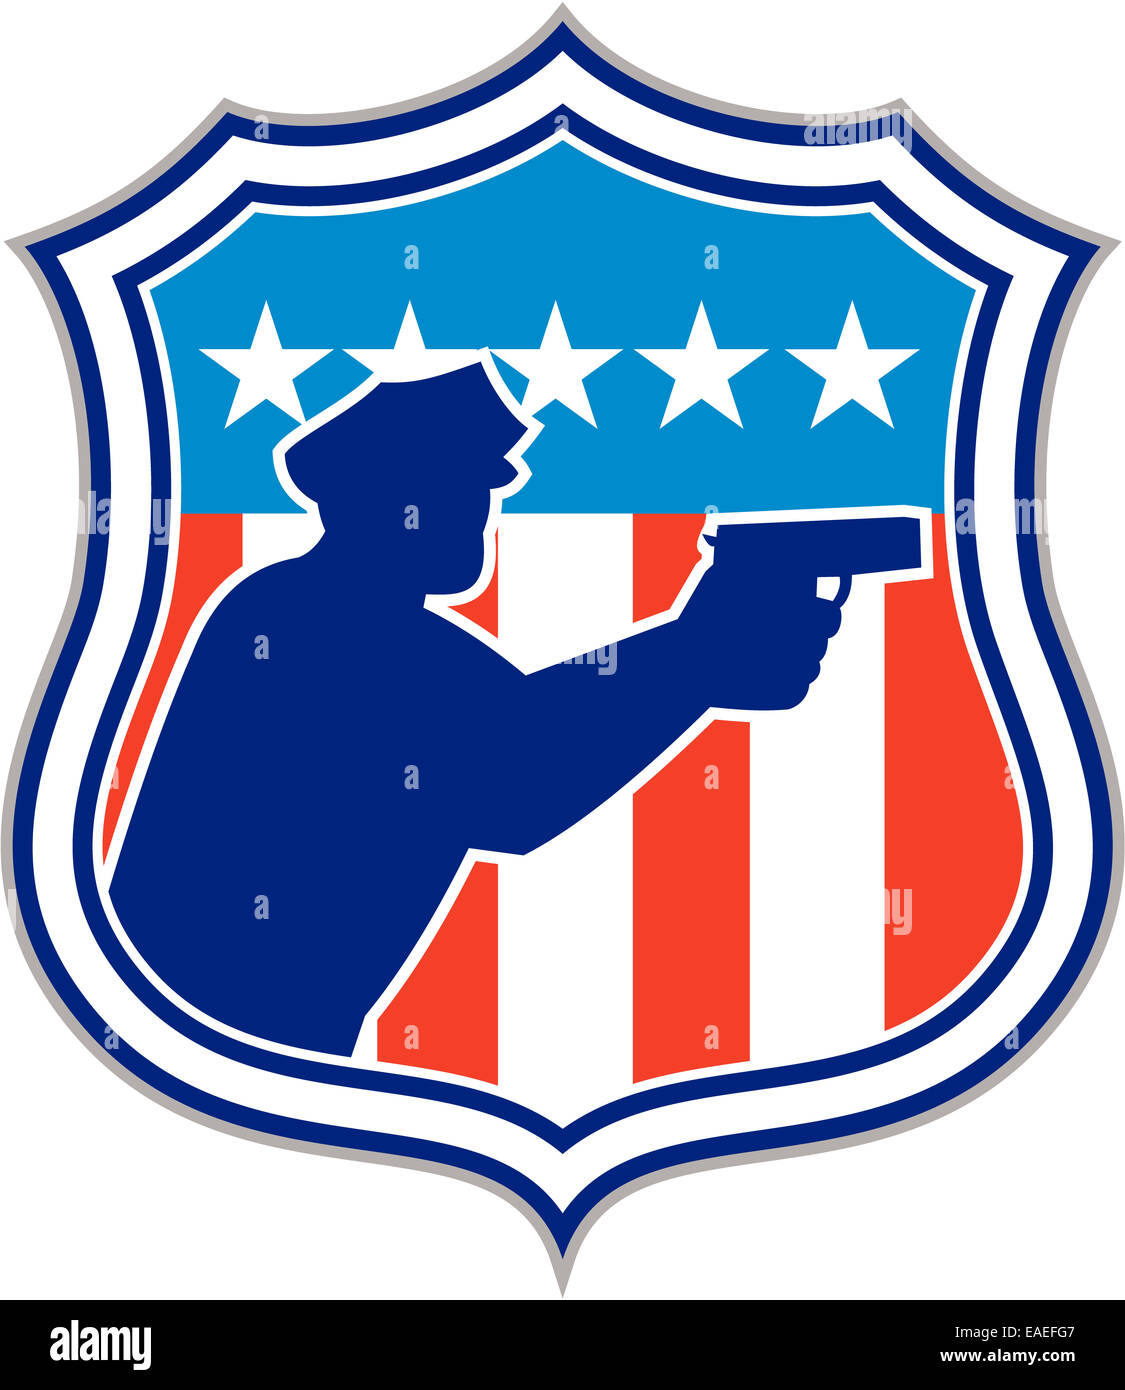 Illustration of a silhouette of a policeman police officer pointing shooting gun facing side set inside shield crest with american stars and stripes flag in the background done in retro style. Stock Photo